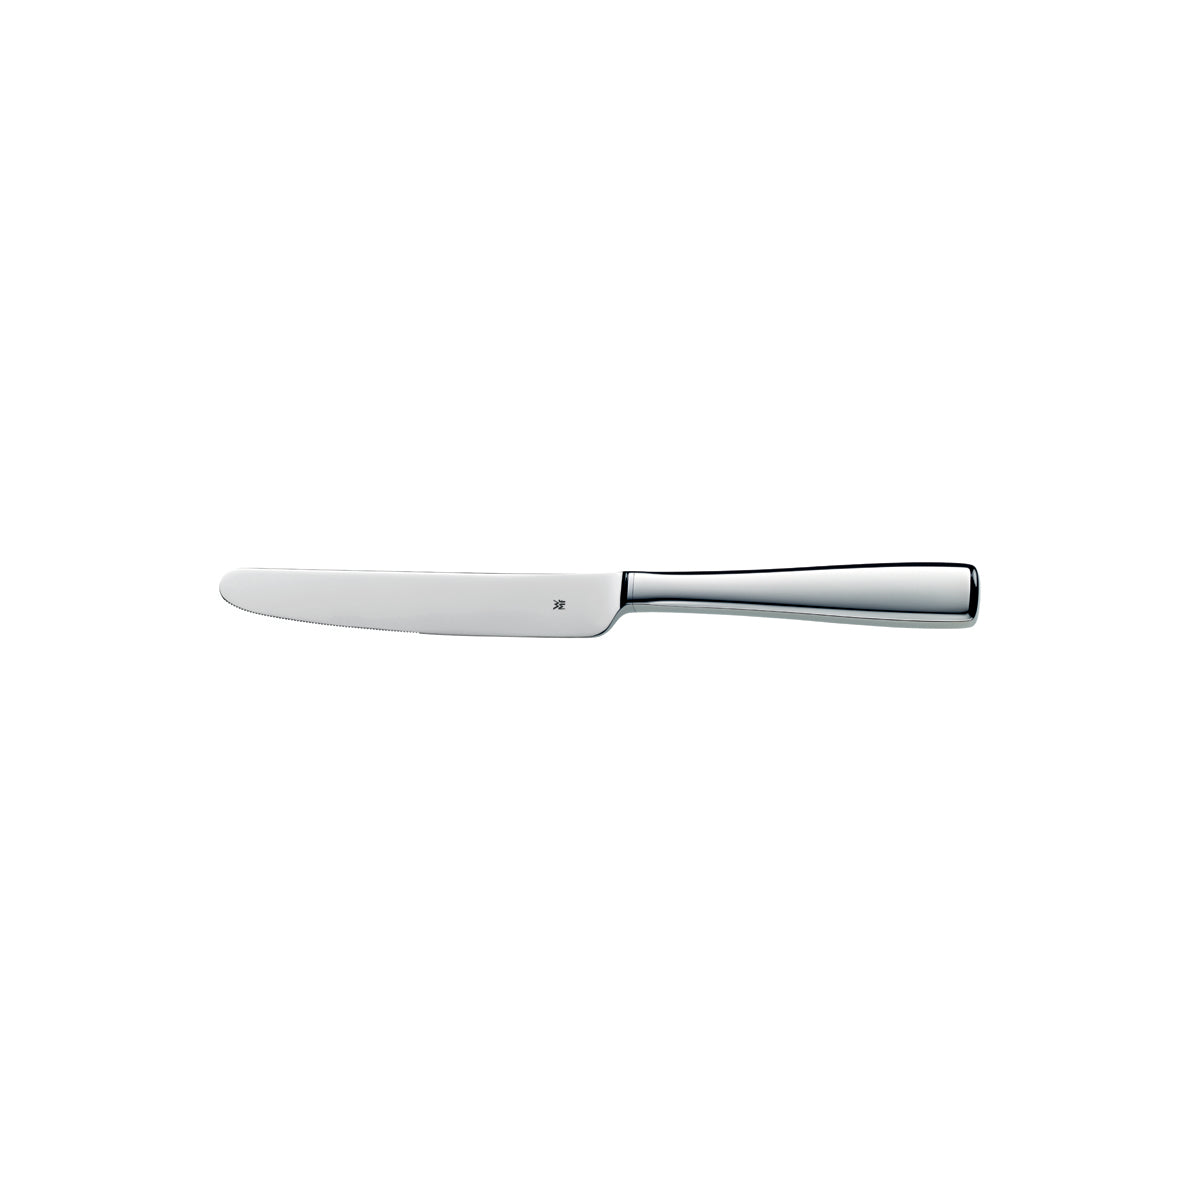 10.7903.6069 WMF Solid Table Knife Silverplated Tomkin Australia Hospitality Supplies